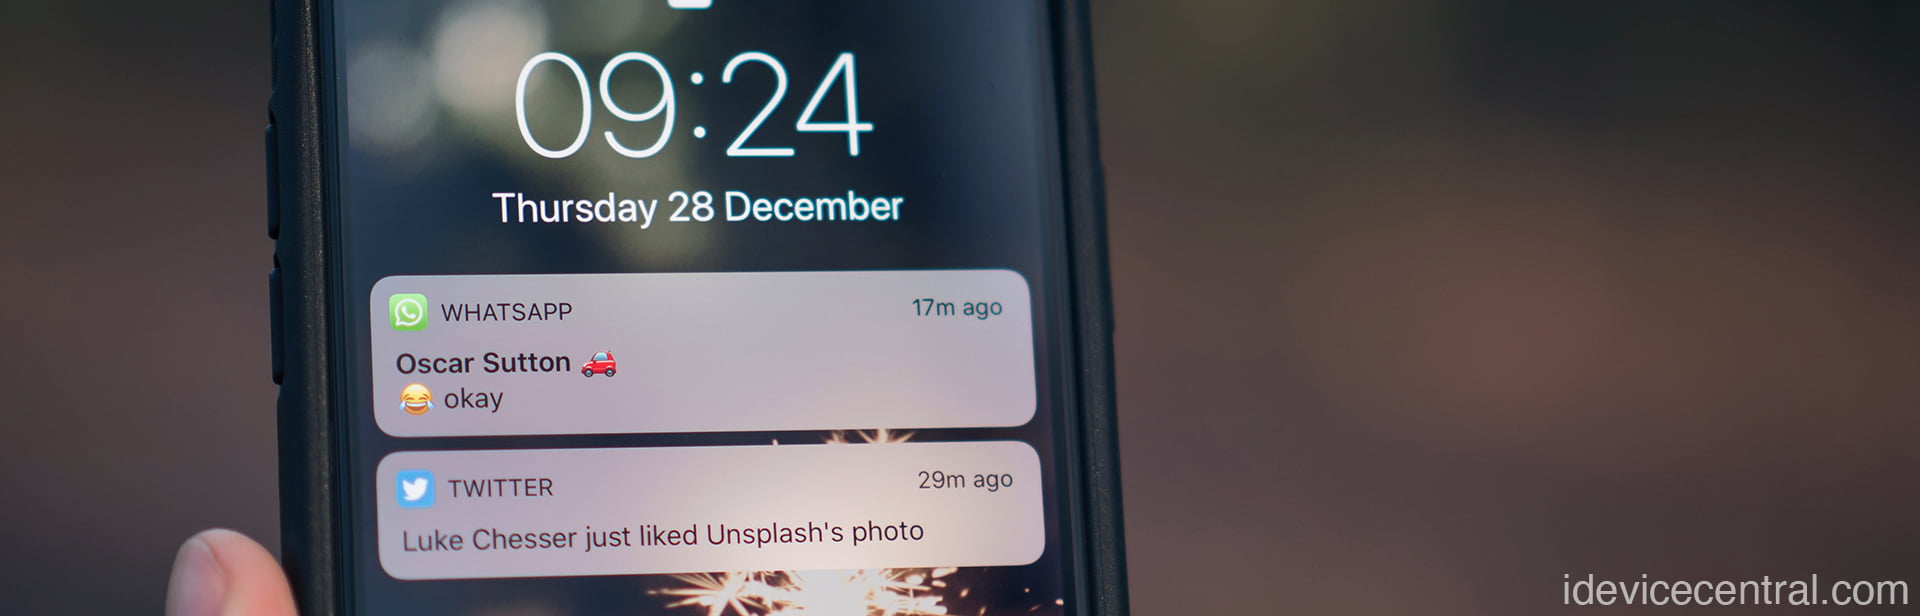 How to Silence and Block Unknown Callers on WhatsApp for iOS